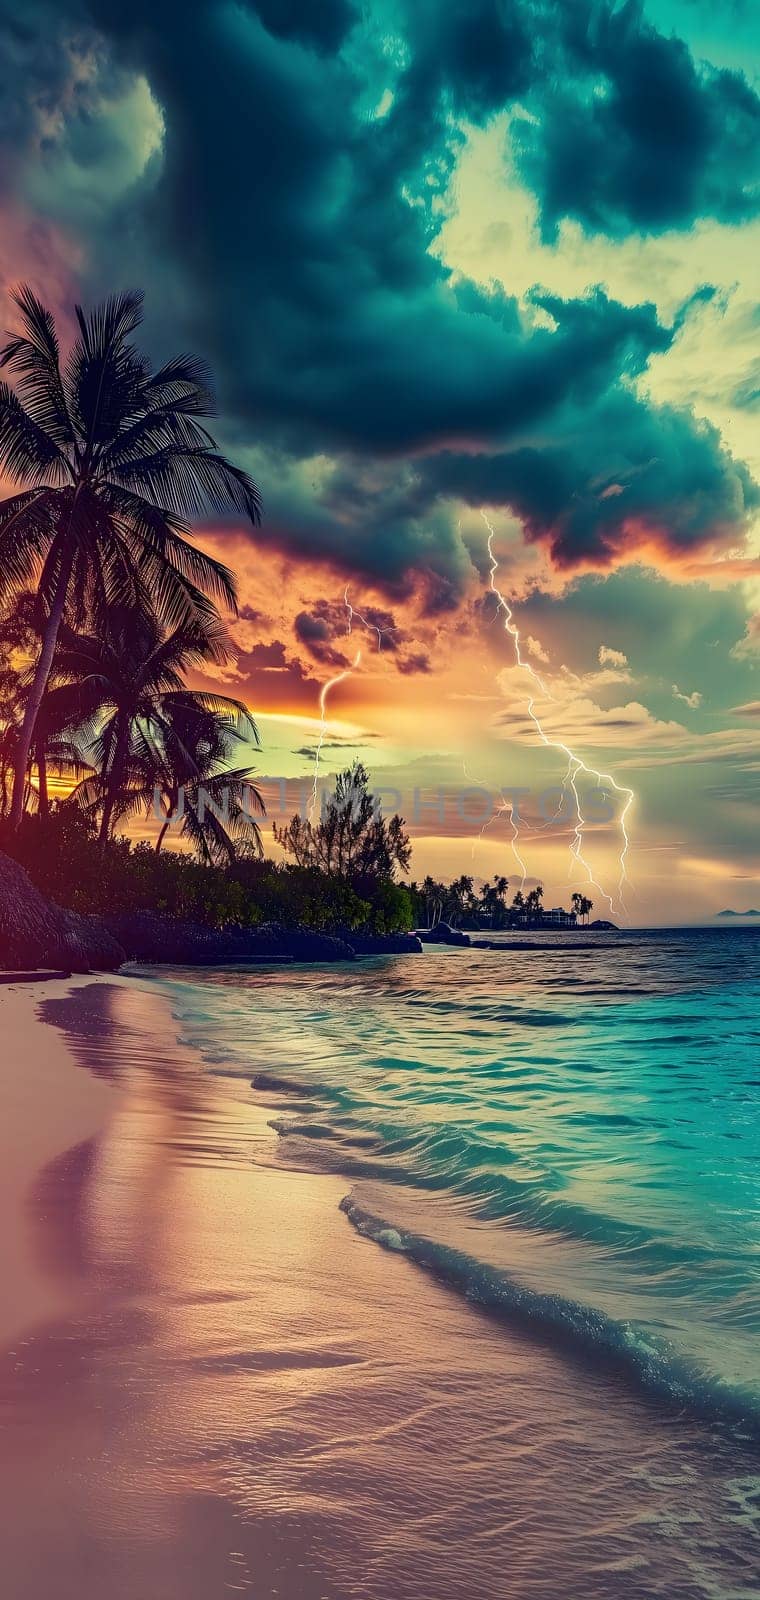 tropical beach view at cloudy stormy sunset with white sand, turquoise water and palm trees, neural network generated image by z1b